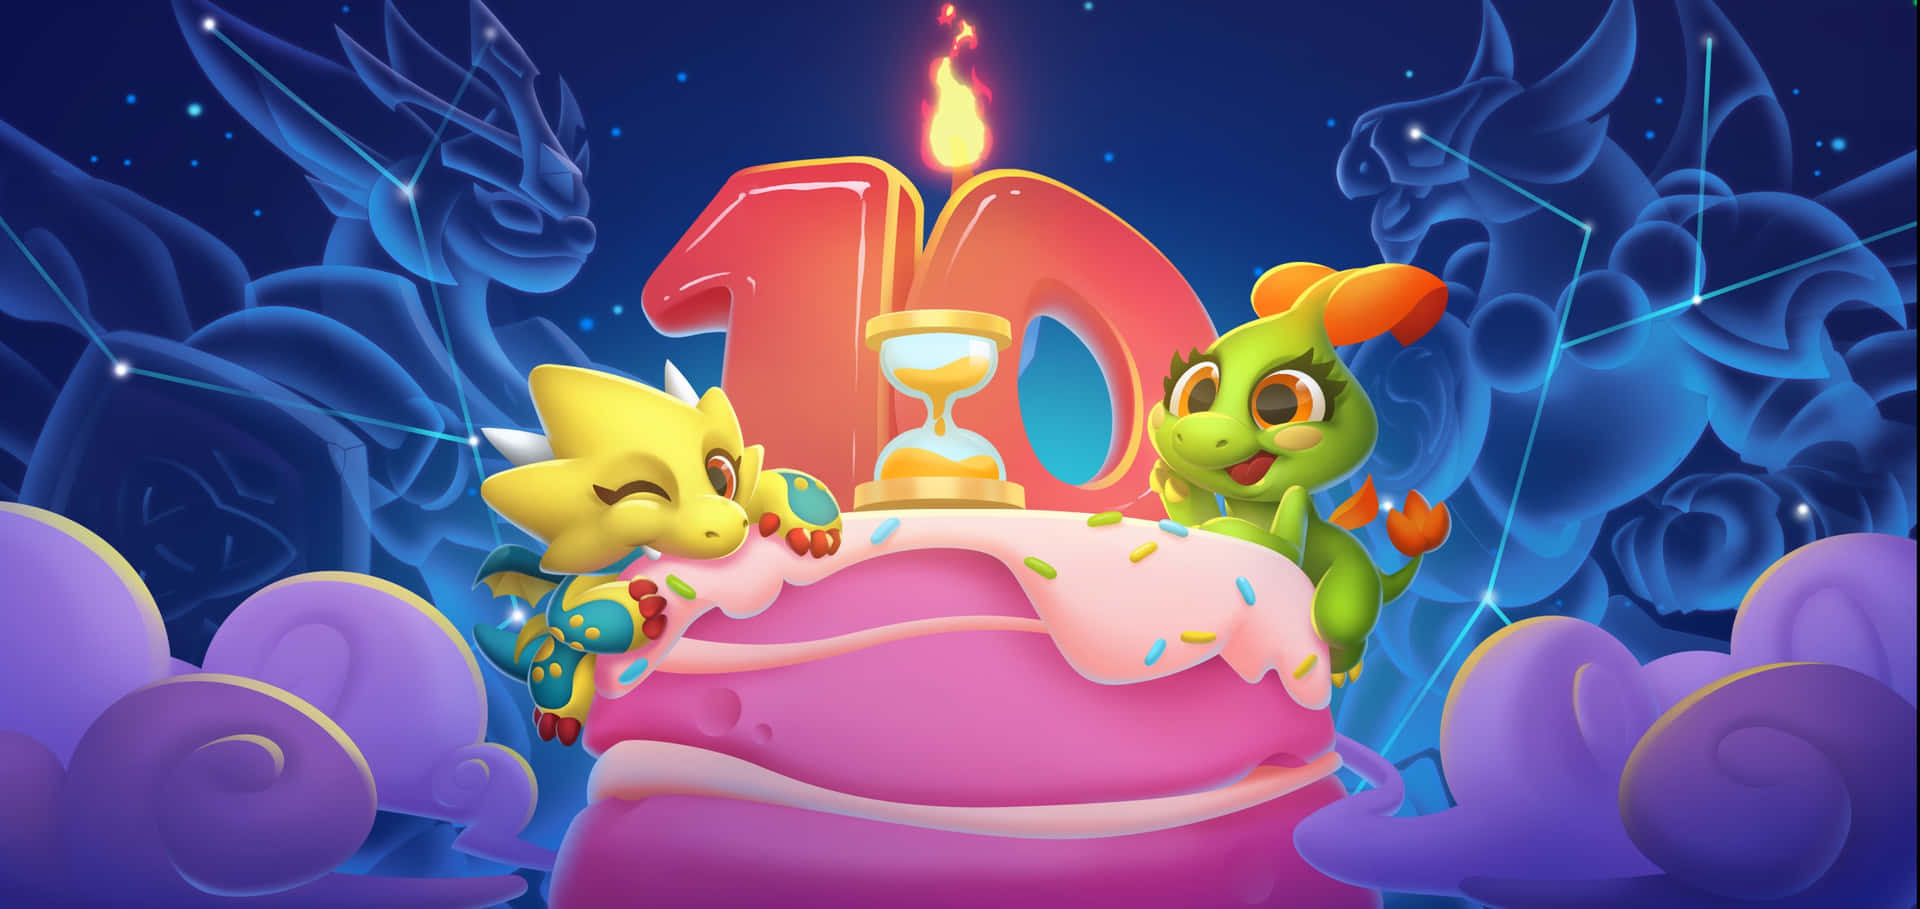 A Birthday Cake With A Dragon And A Dragon